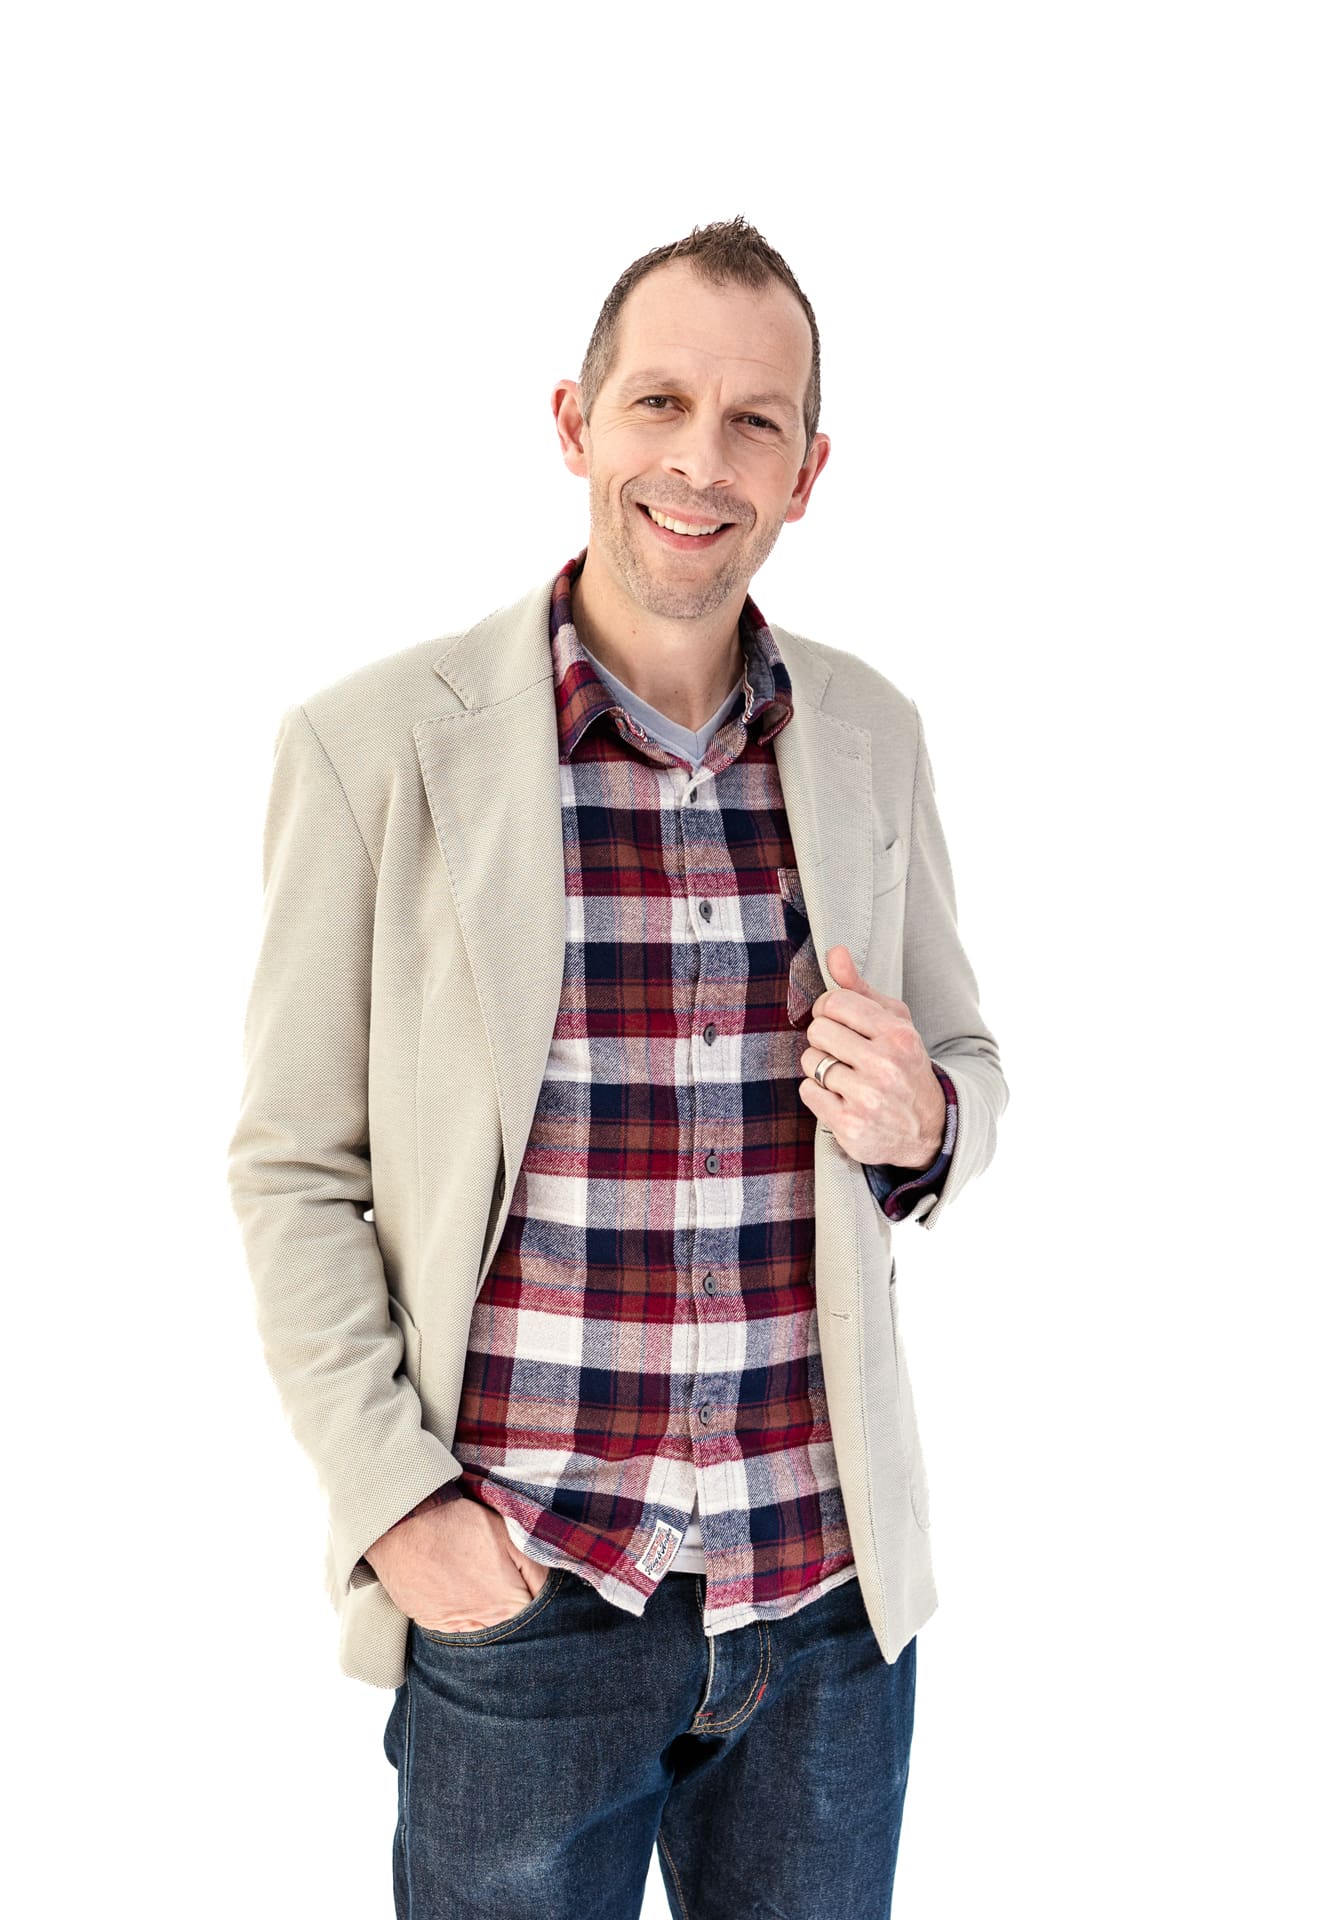 Headshot of man in cream colored jacket and plaid shirt at Chicago photography studio P&M Studio